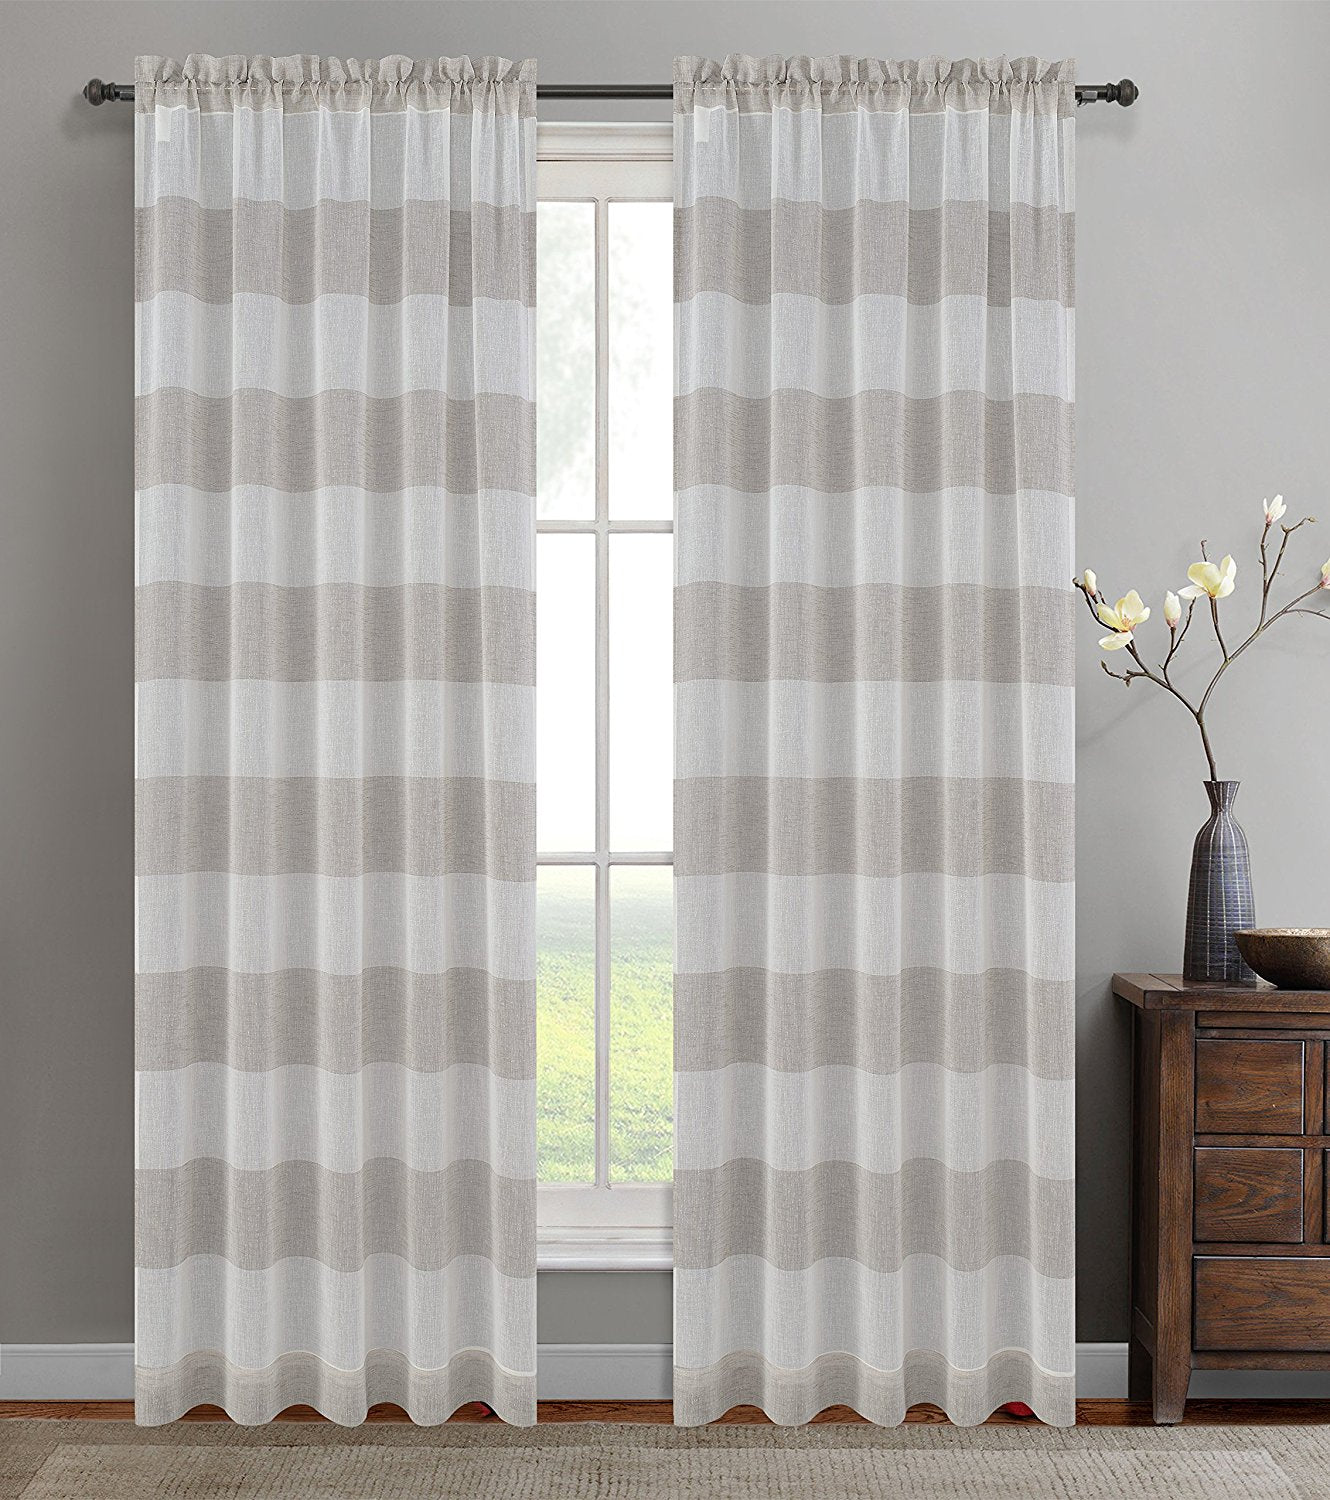 Nassau Faux Linen Sheer Striped Curtain Panels with Rod Pocket - 7 Col ...